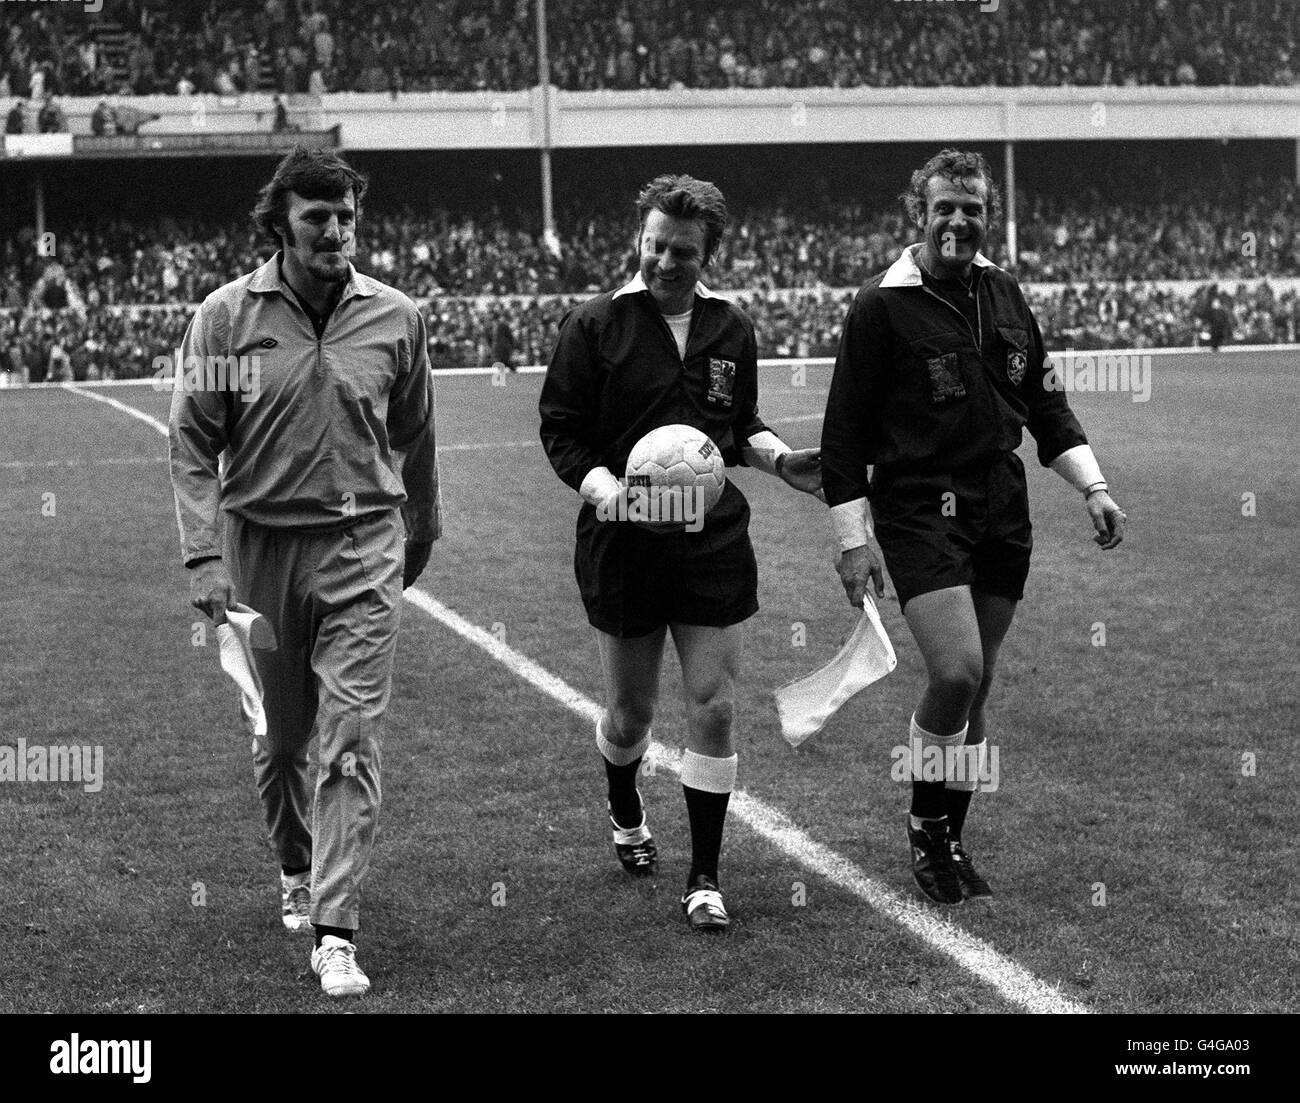 PA NEWS PHOTO 16/9/72 FOOTBALL TELEVISION PUNDIT JIMMY HILL (LEFT) PICTURED WITH REFEREE P. PARTRIDGE AND THE OTHER LINESMAN J.W.A. CRAIGIE LEAVING THE PITCH AFTER RUNNING THE LINE DURING THE ARSENAL VS LIVERPOOL MATCH AT HIGHBURY IN LONDON Stock Photo